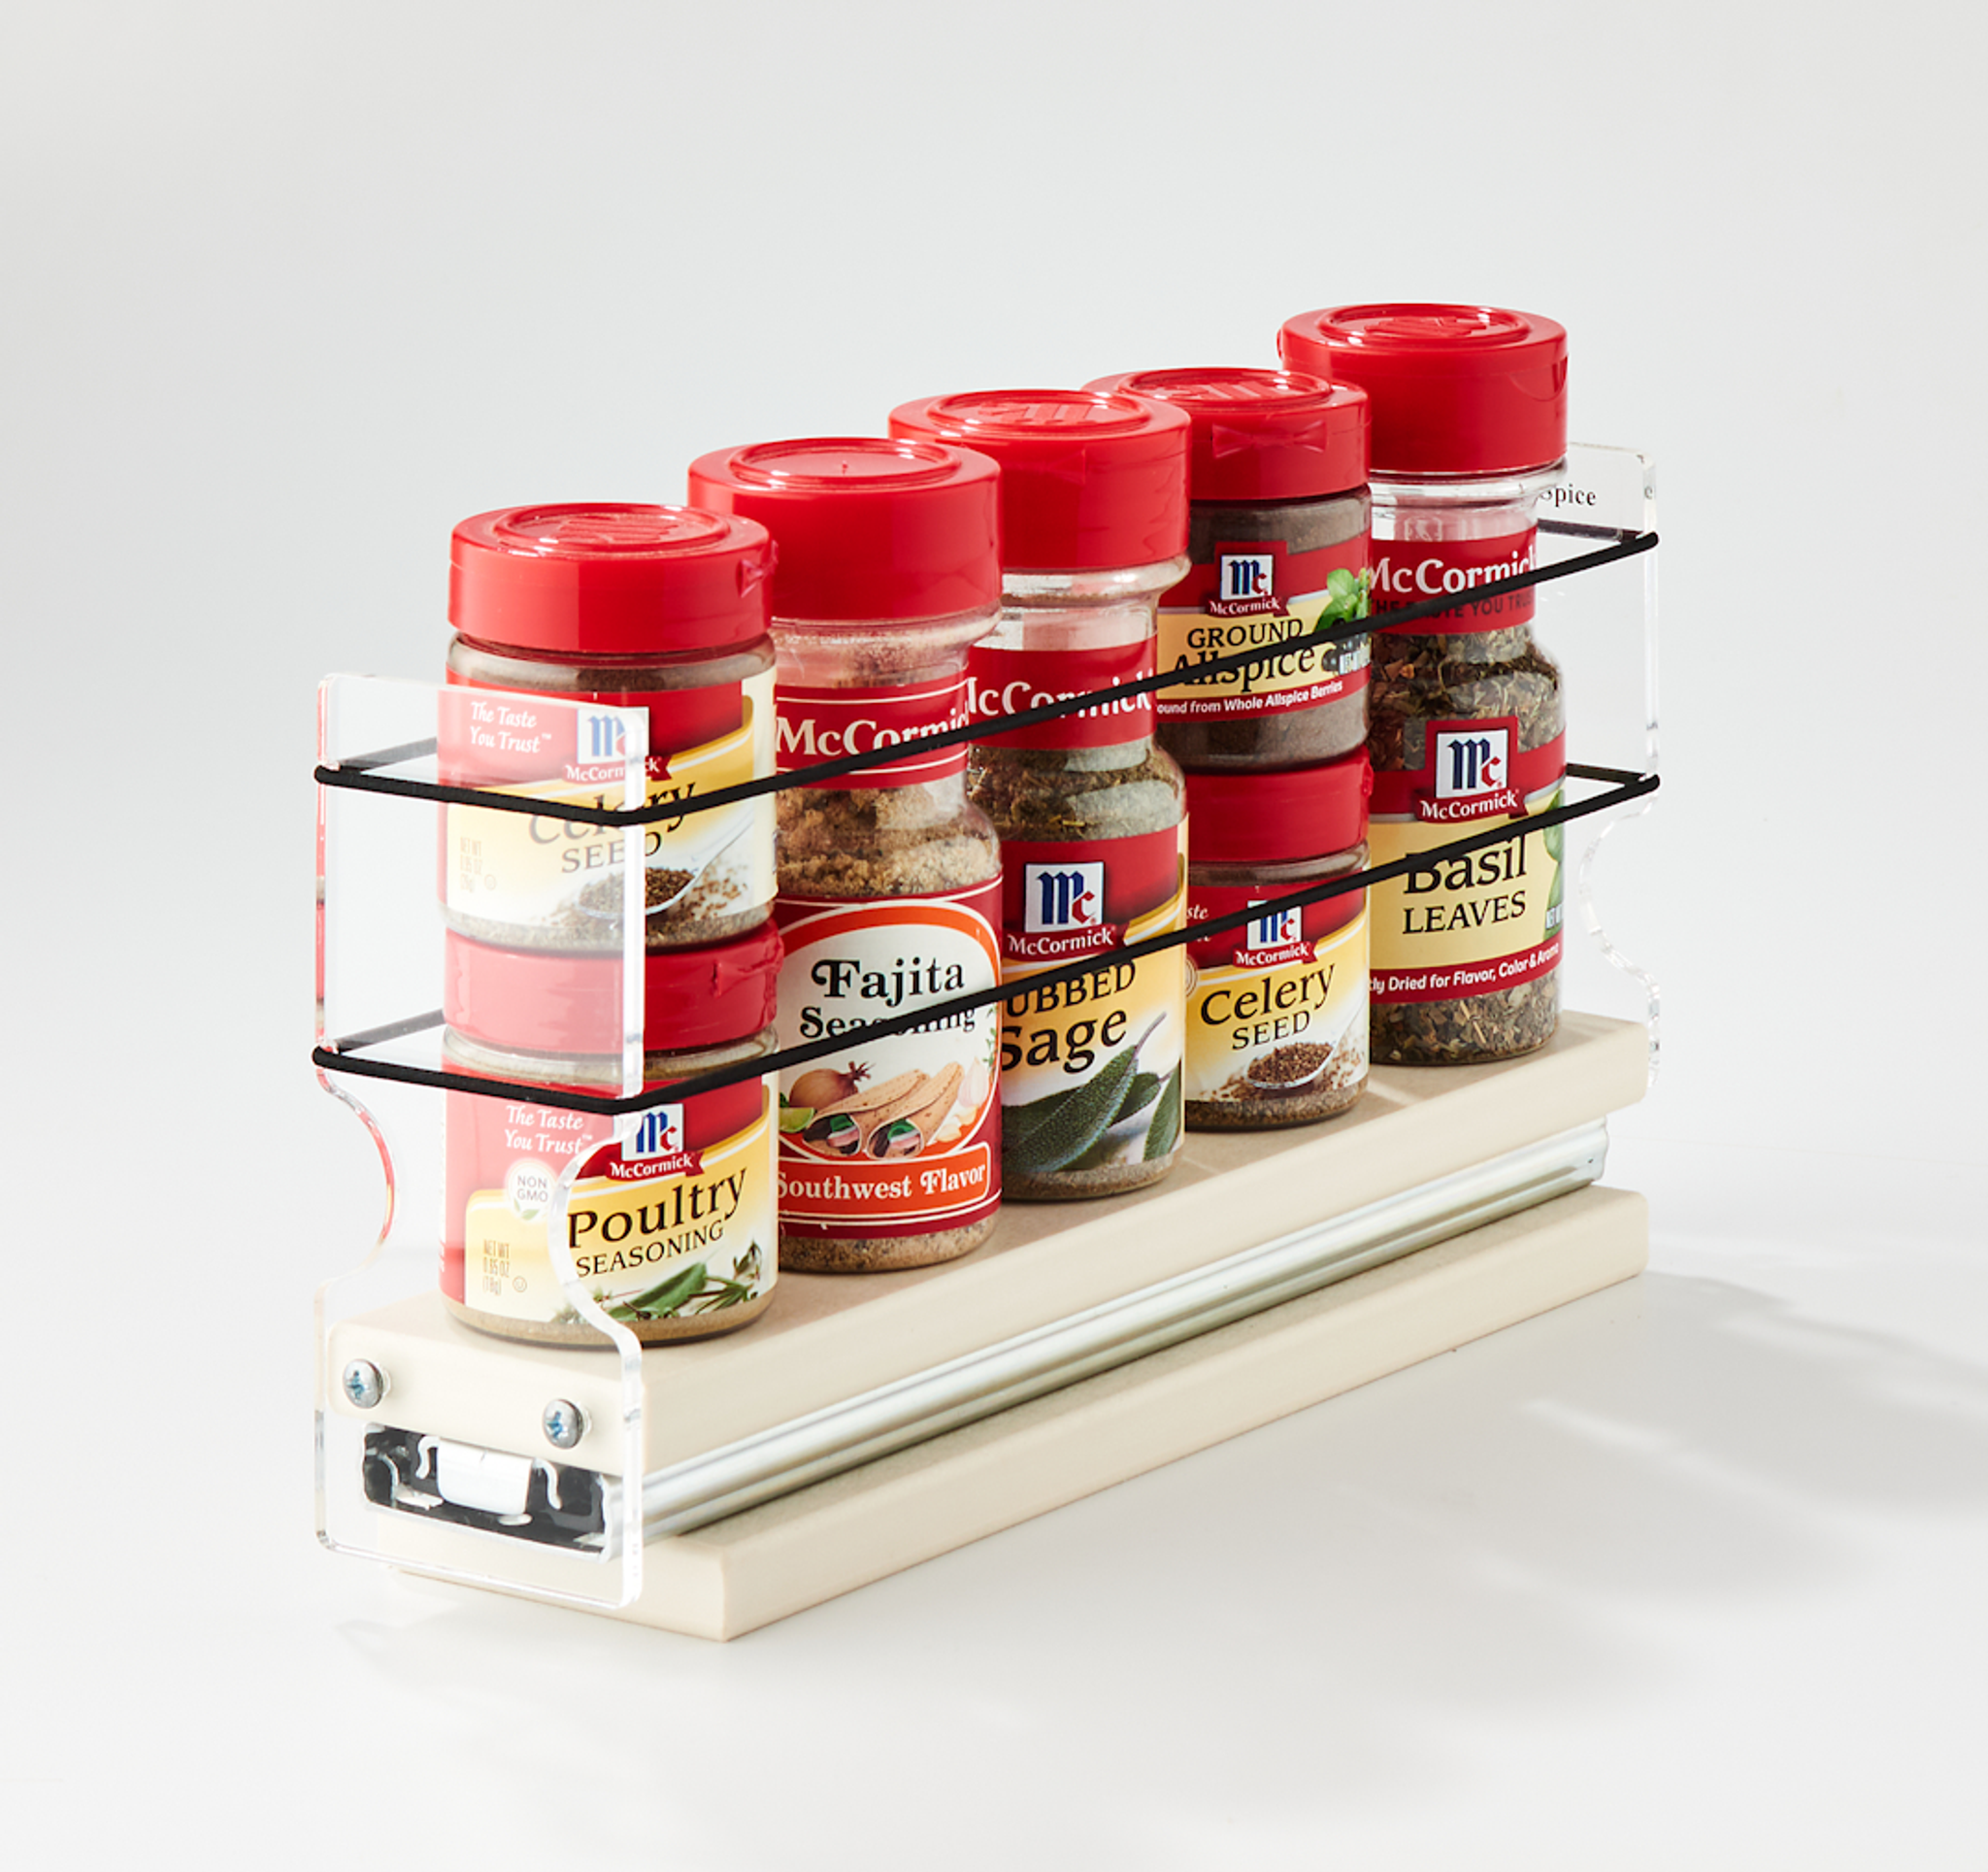 Pull Out Spice Rack Organizer for Cabinet